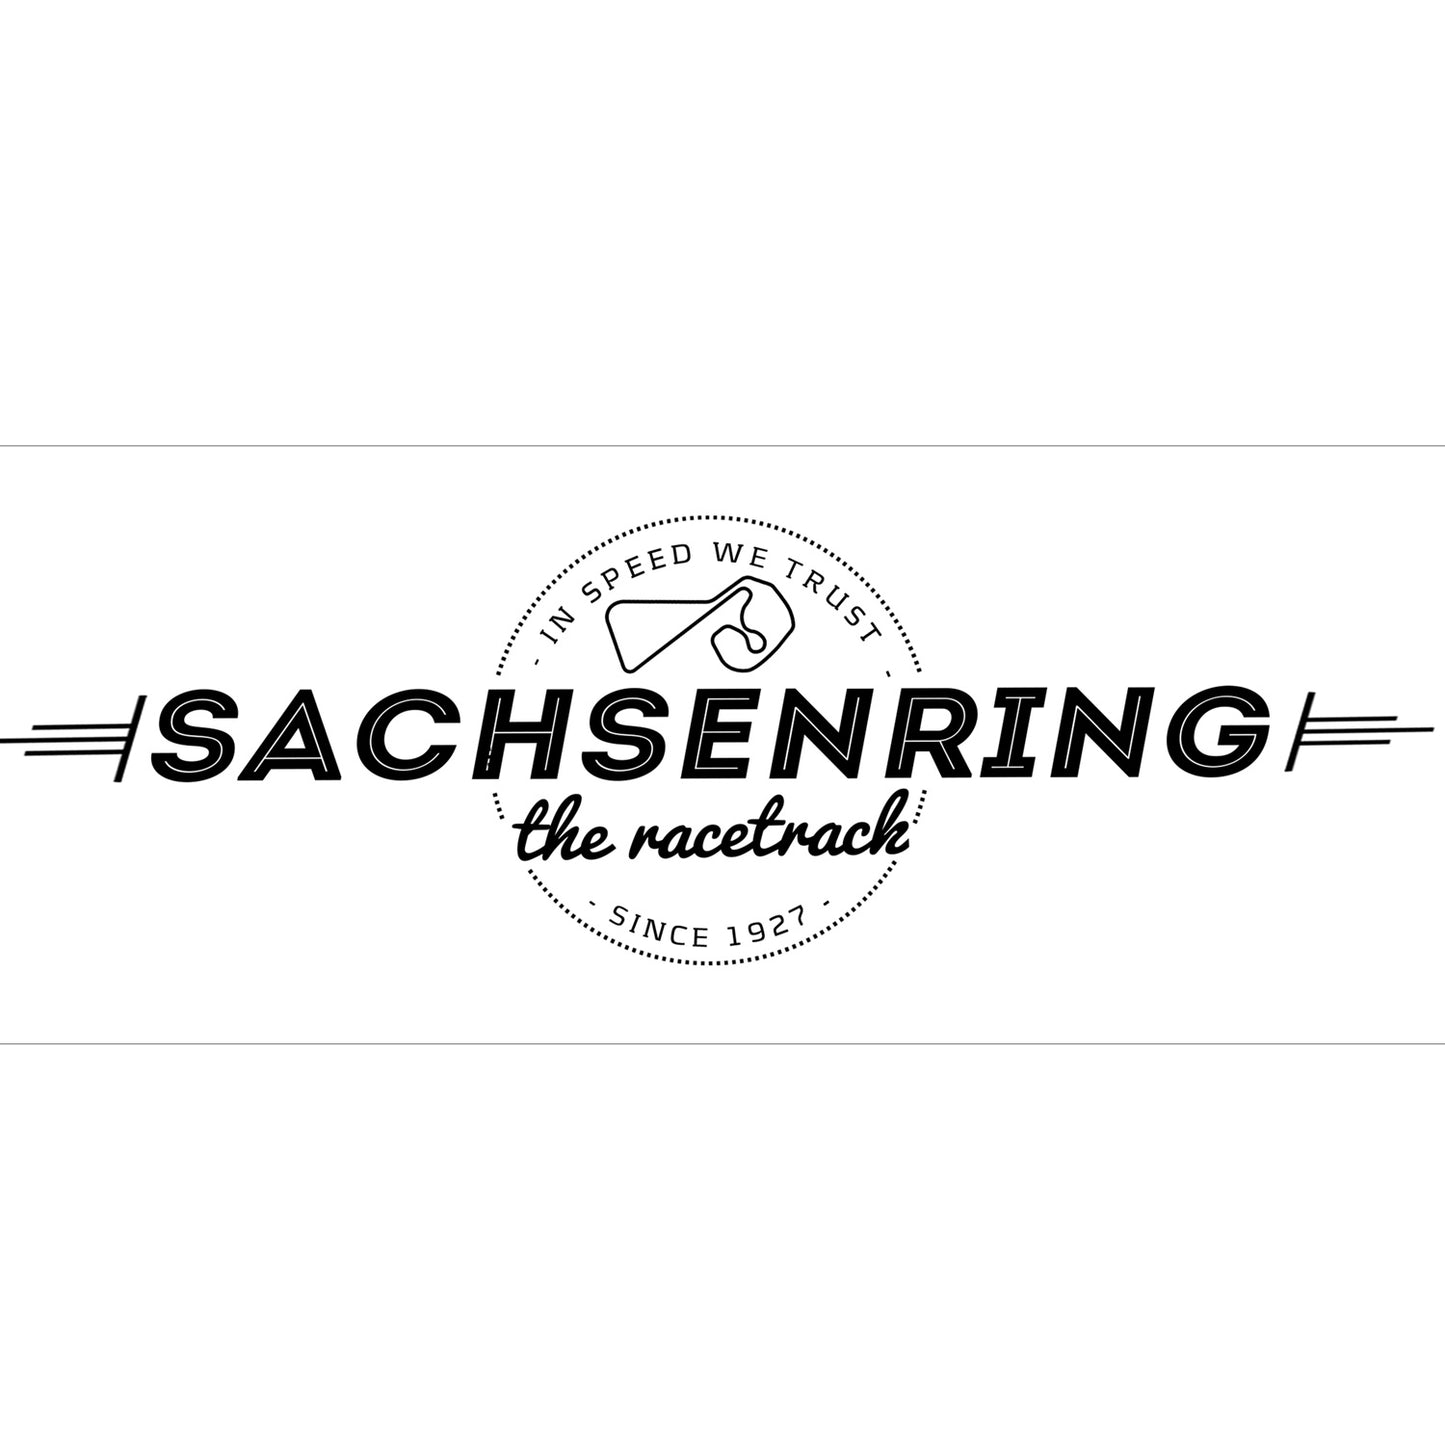 Emaille Becher - "Sachsenring - in speed we trust" - GPE01